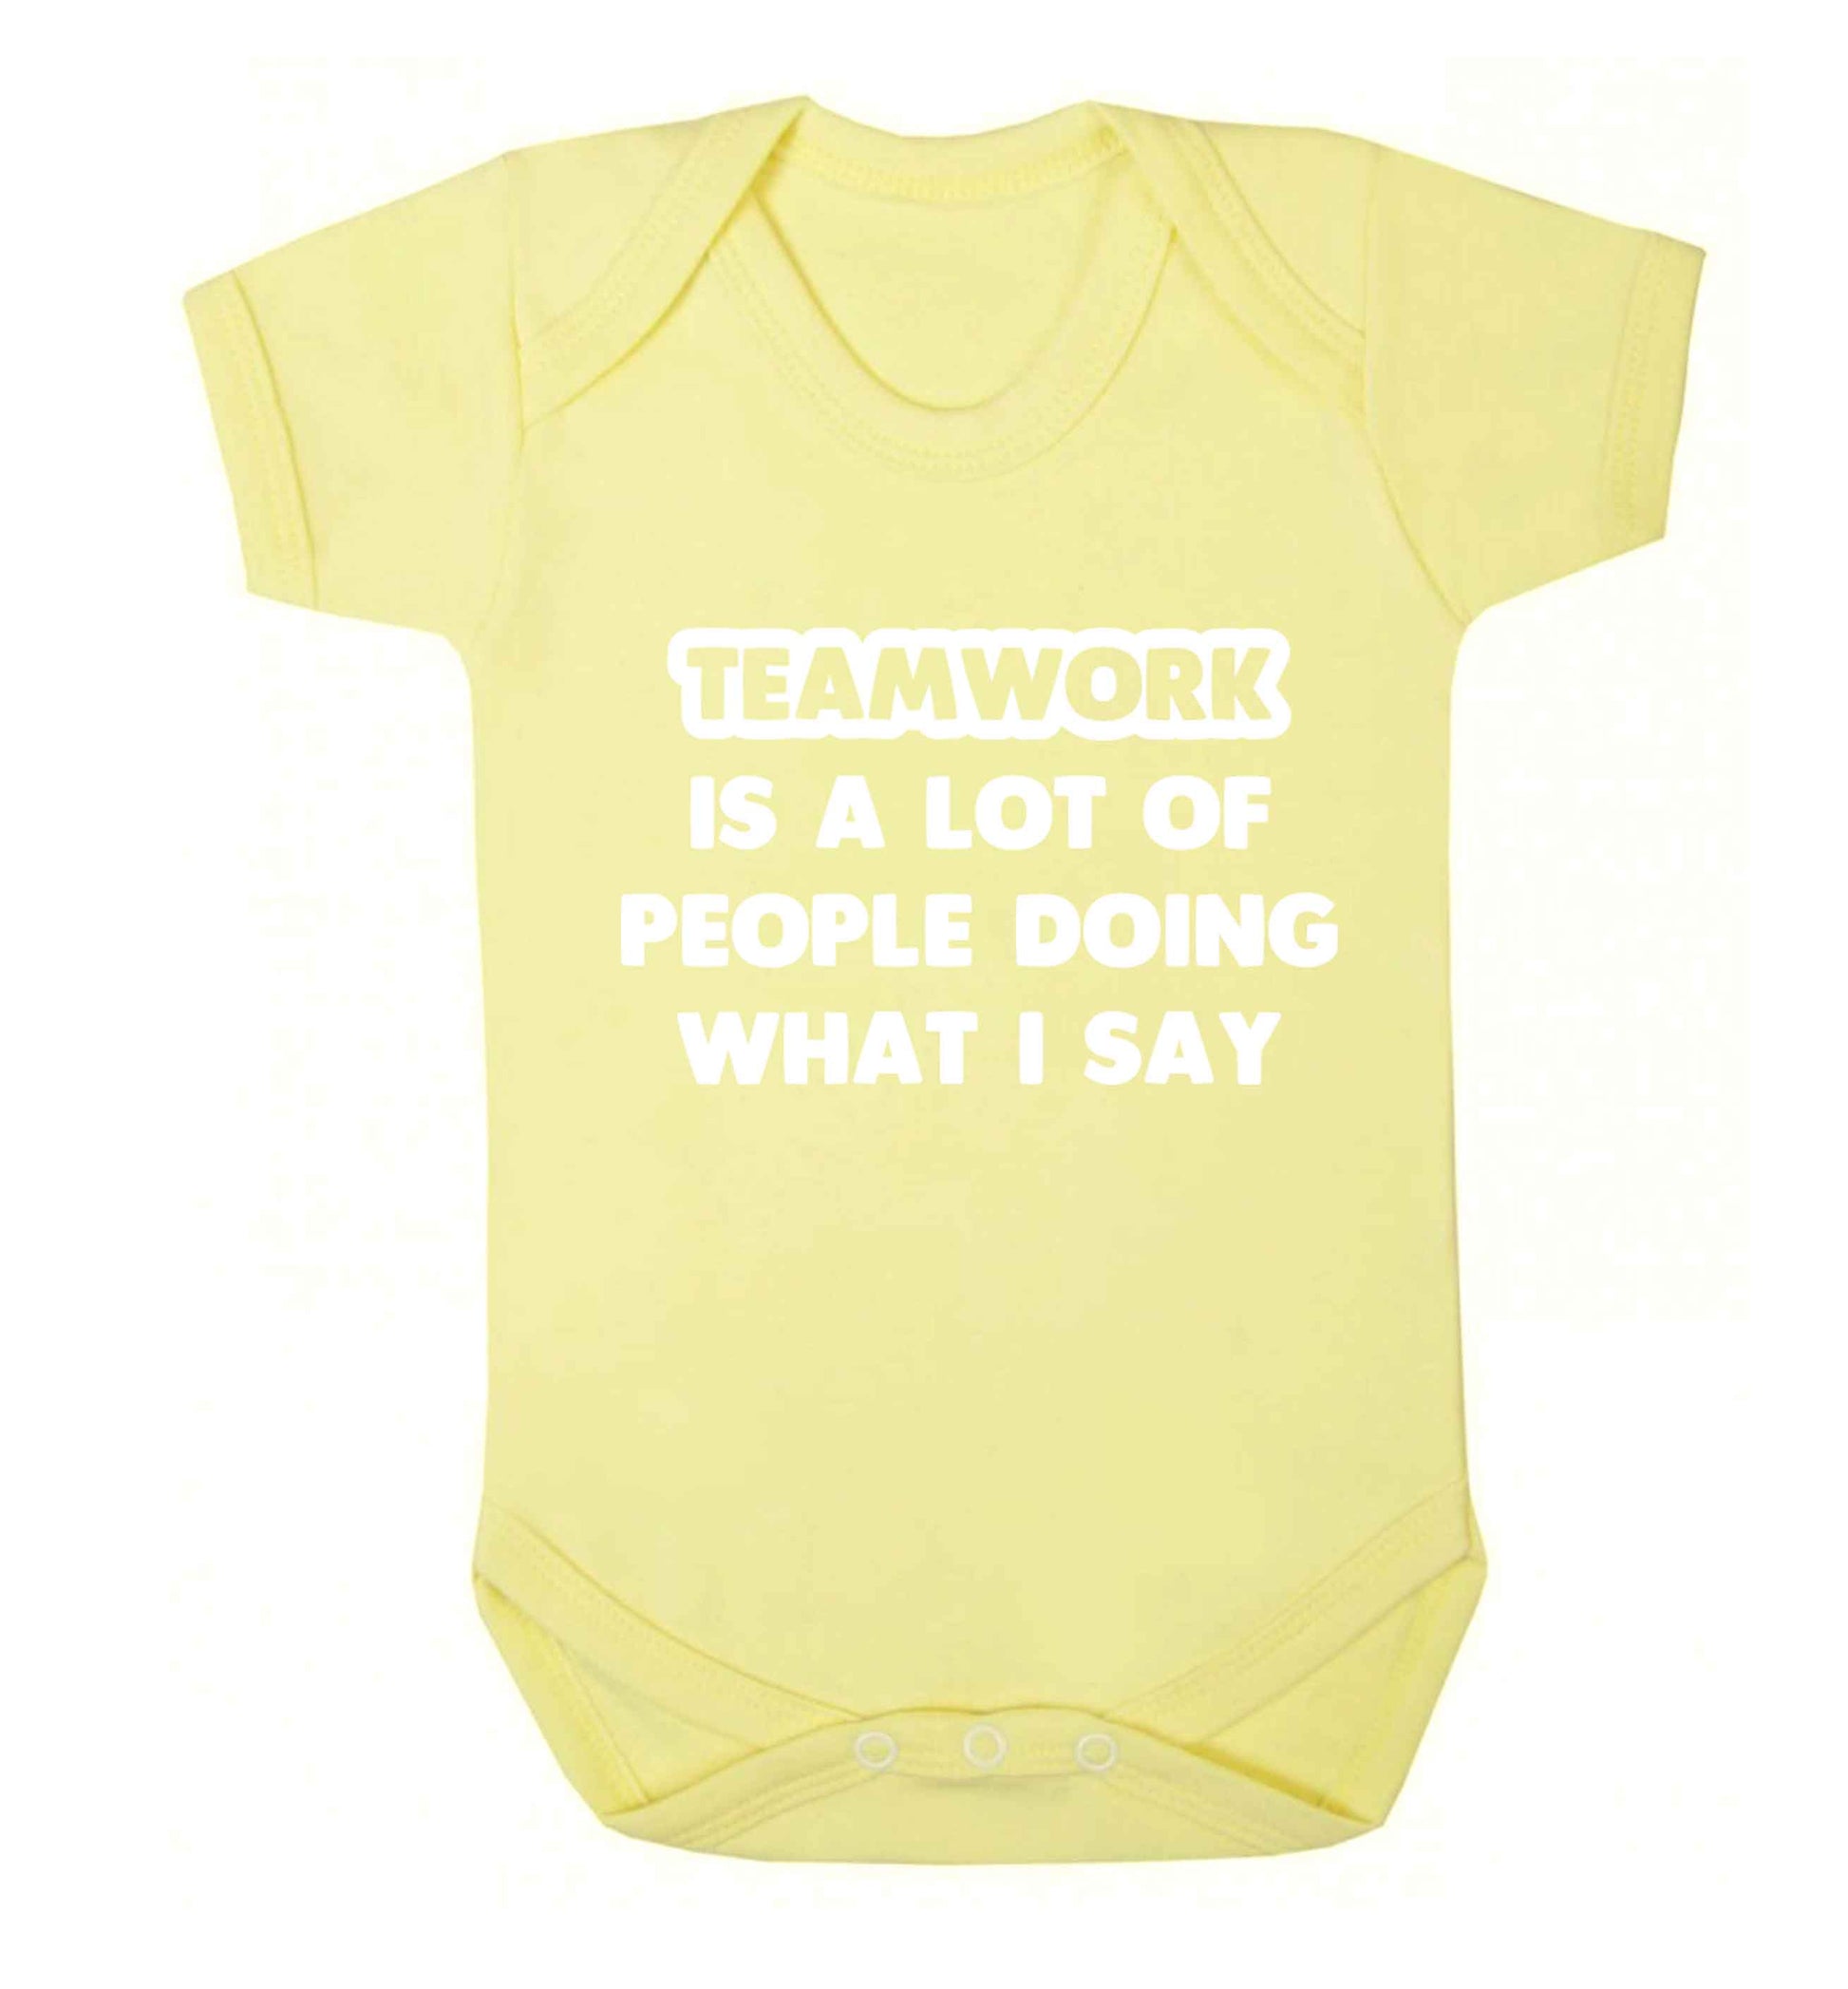 Teamwork is a lot of people doing what I say Baby Vest pale yellow 18-24 months